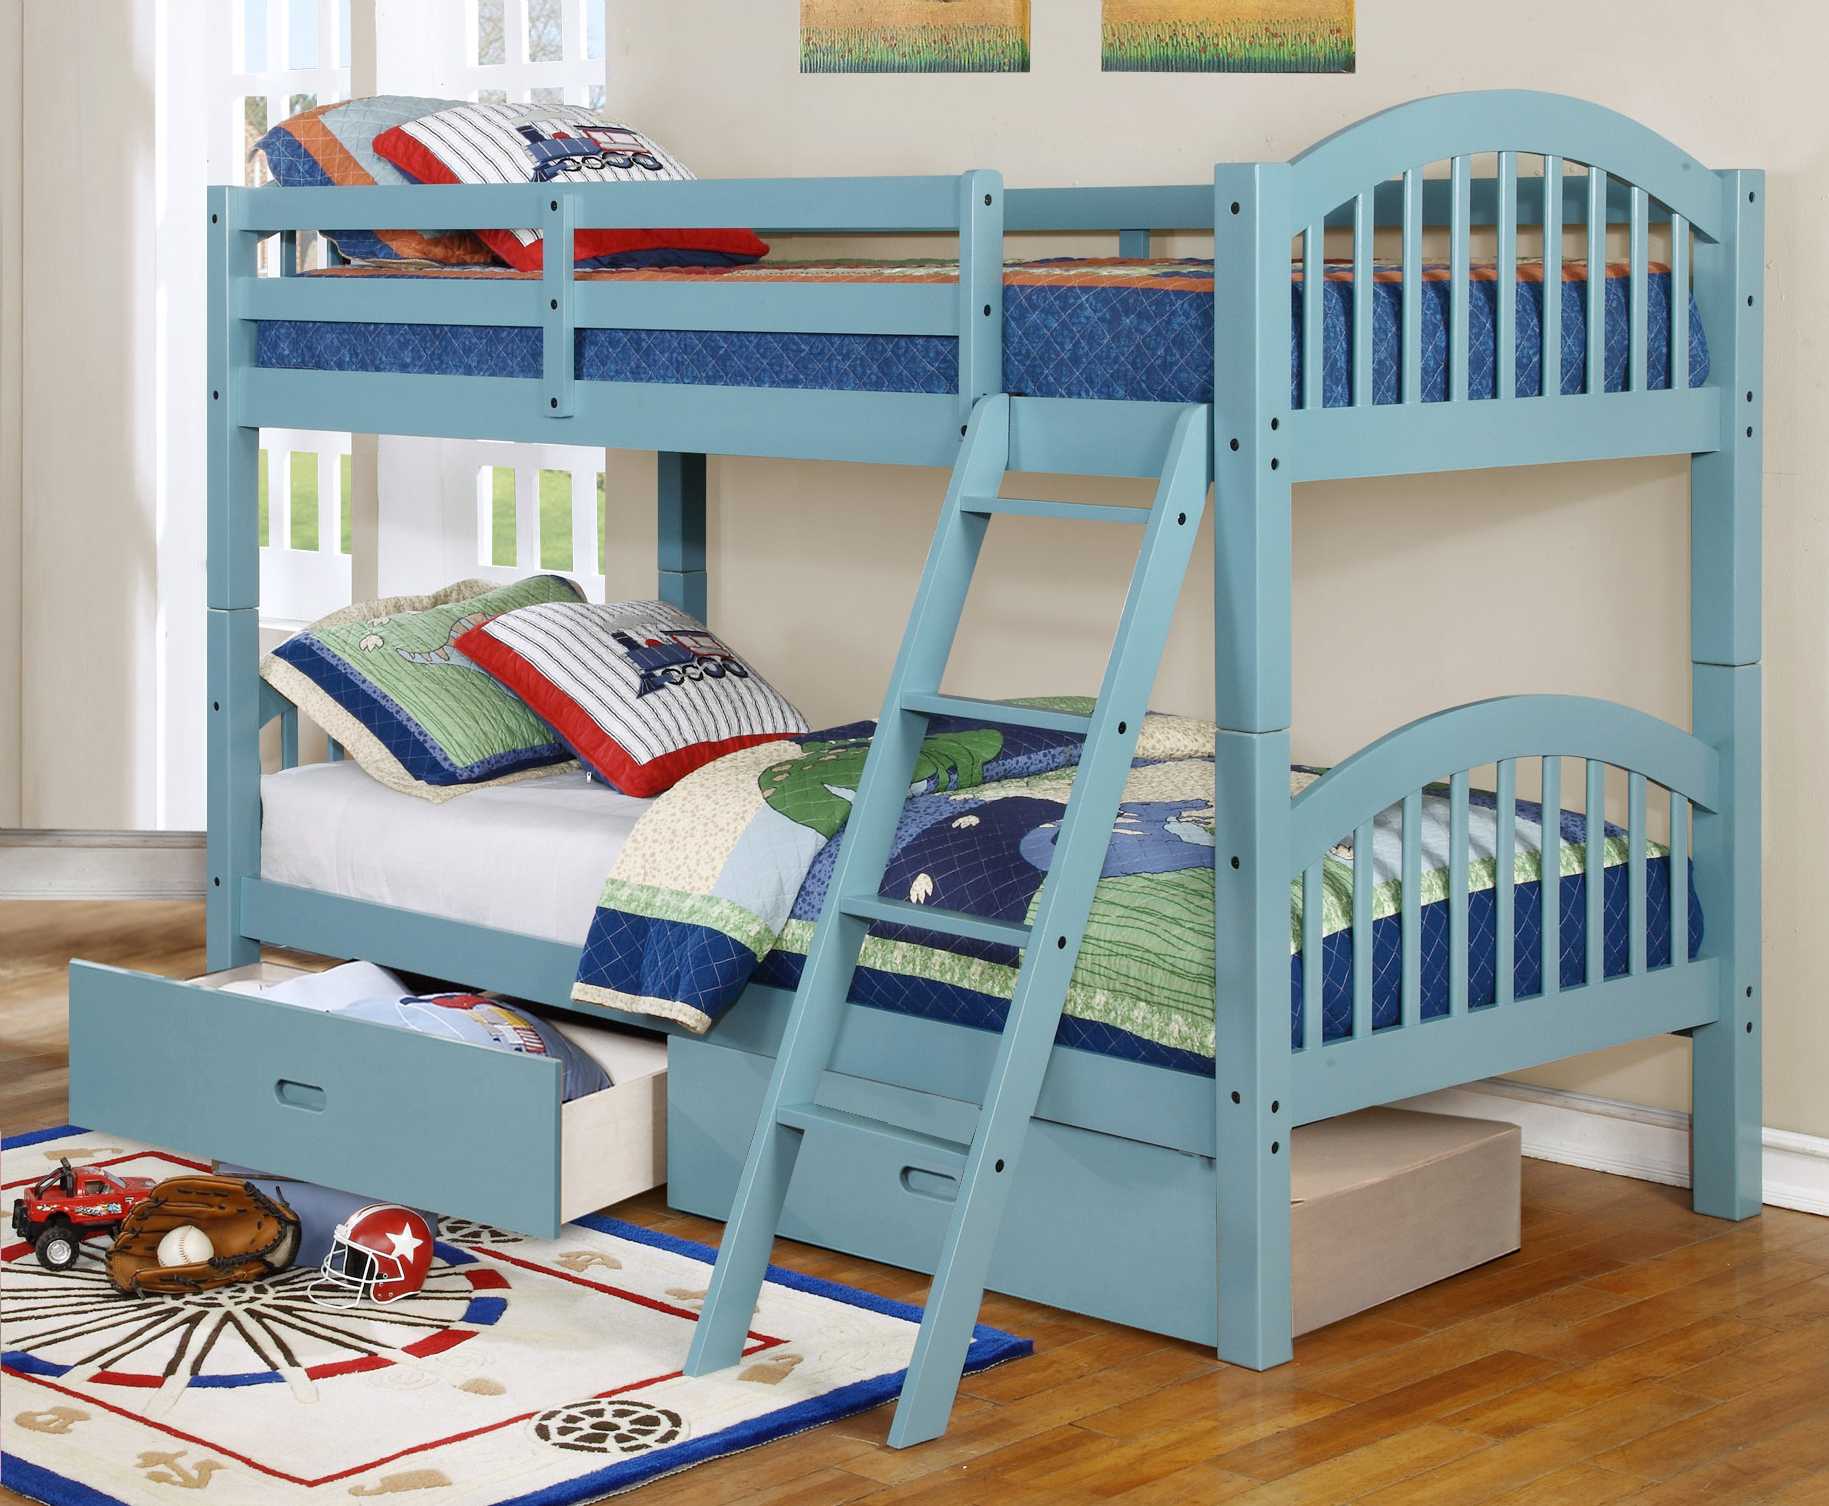 81.25" X 42.5" X 62.5" Blue Solid and Manufactured Wood Twin or Twin Arched Wood Bunk Bed with 2 Drawers